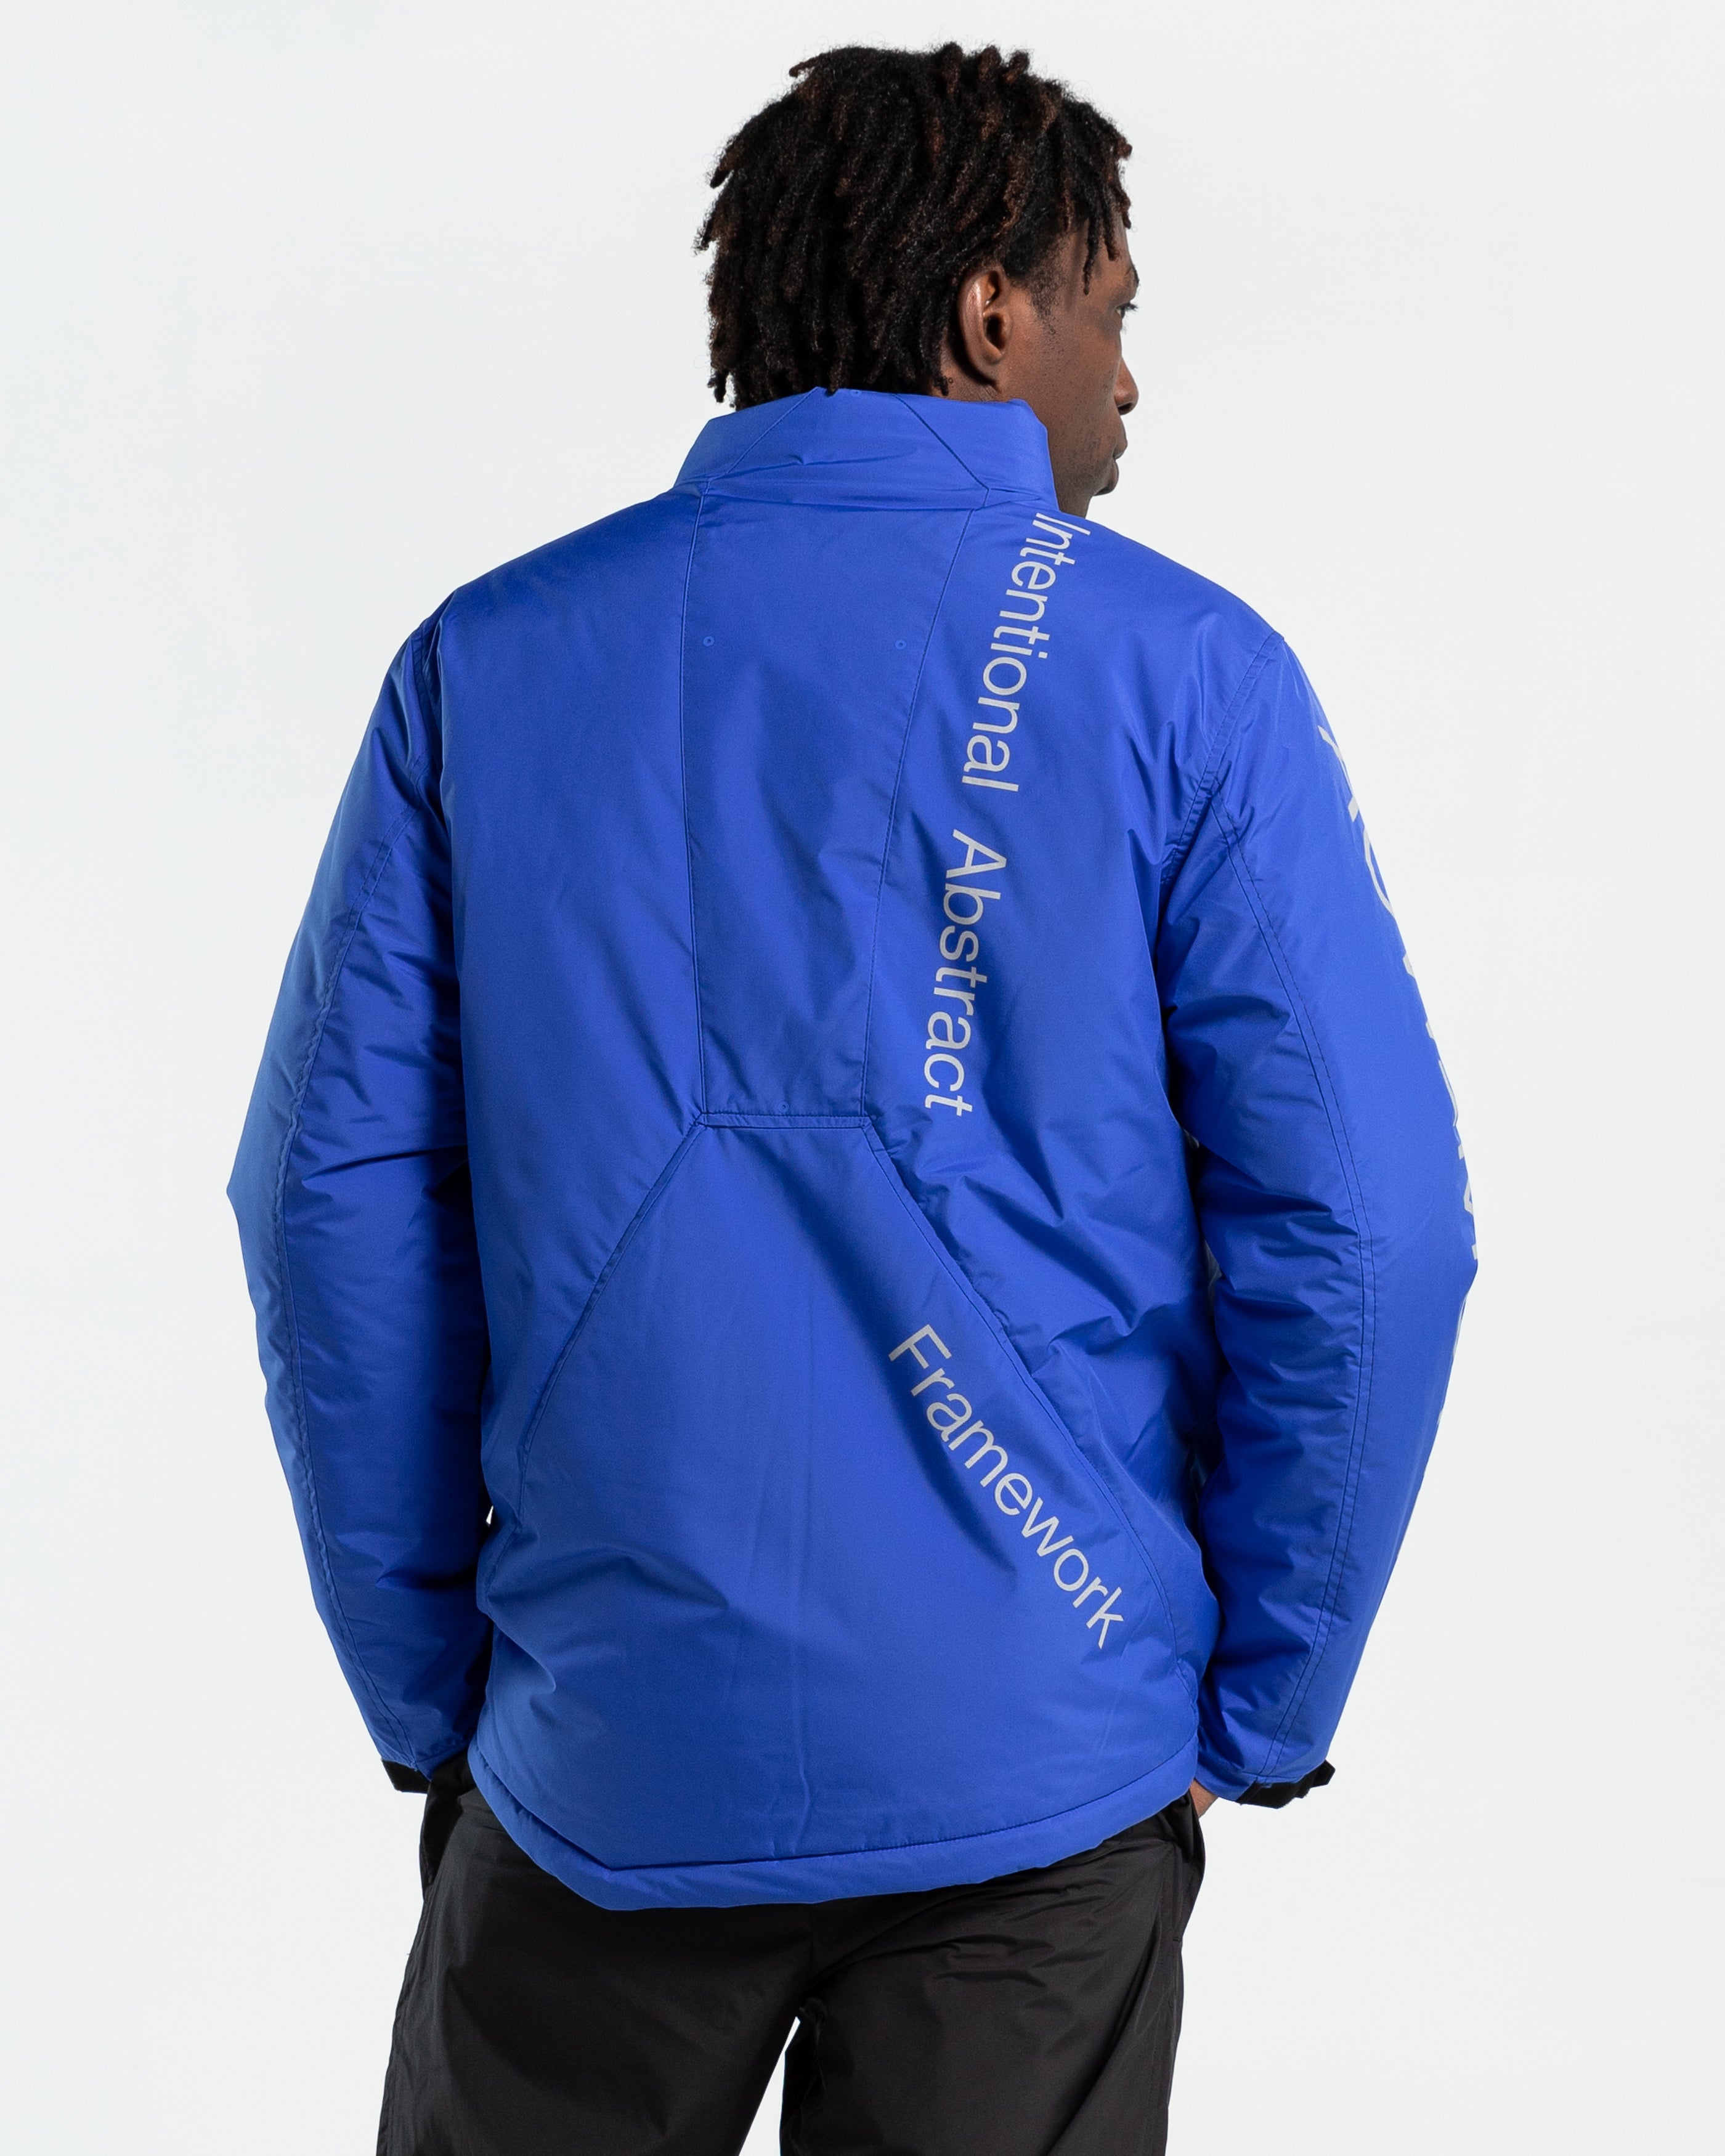 Nephin Storm Jacket in Volt Blue